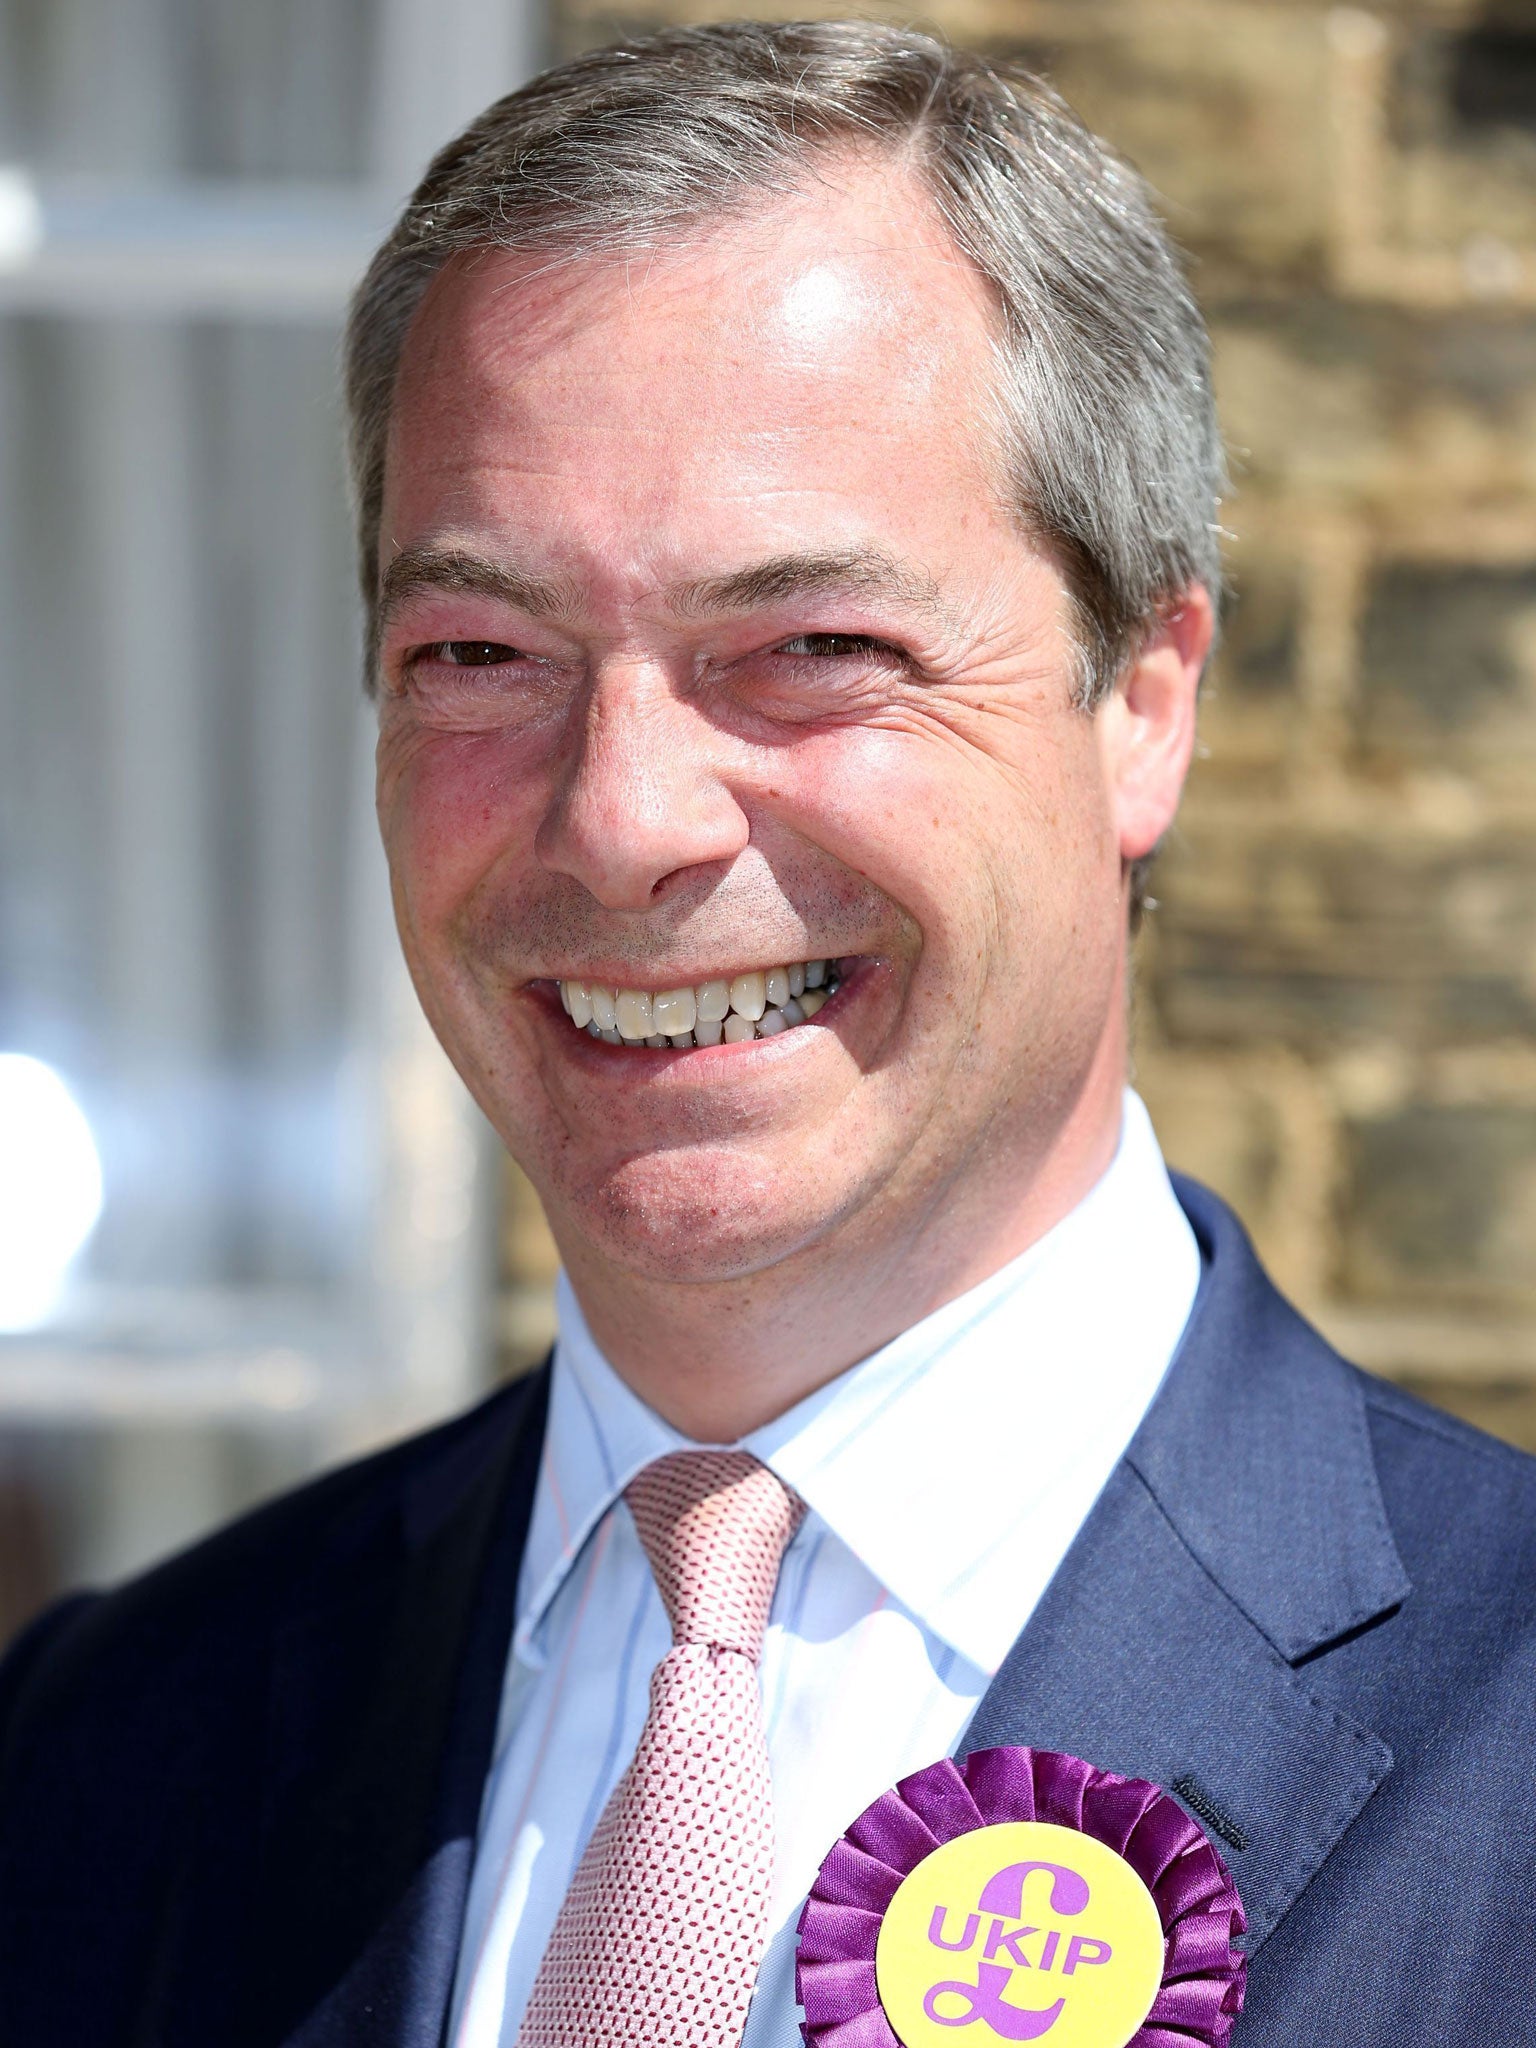 Nigel Farage said he wanted Tories to switch allegiance temporarily